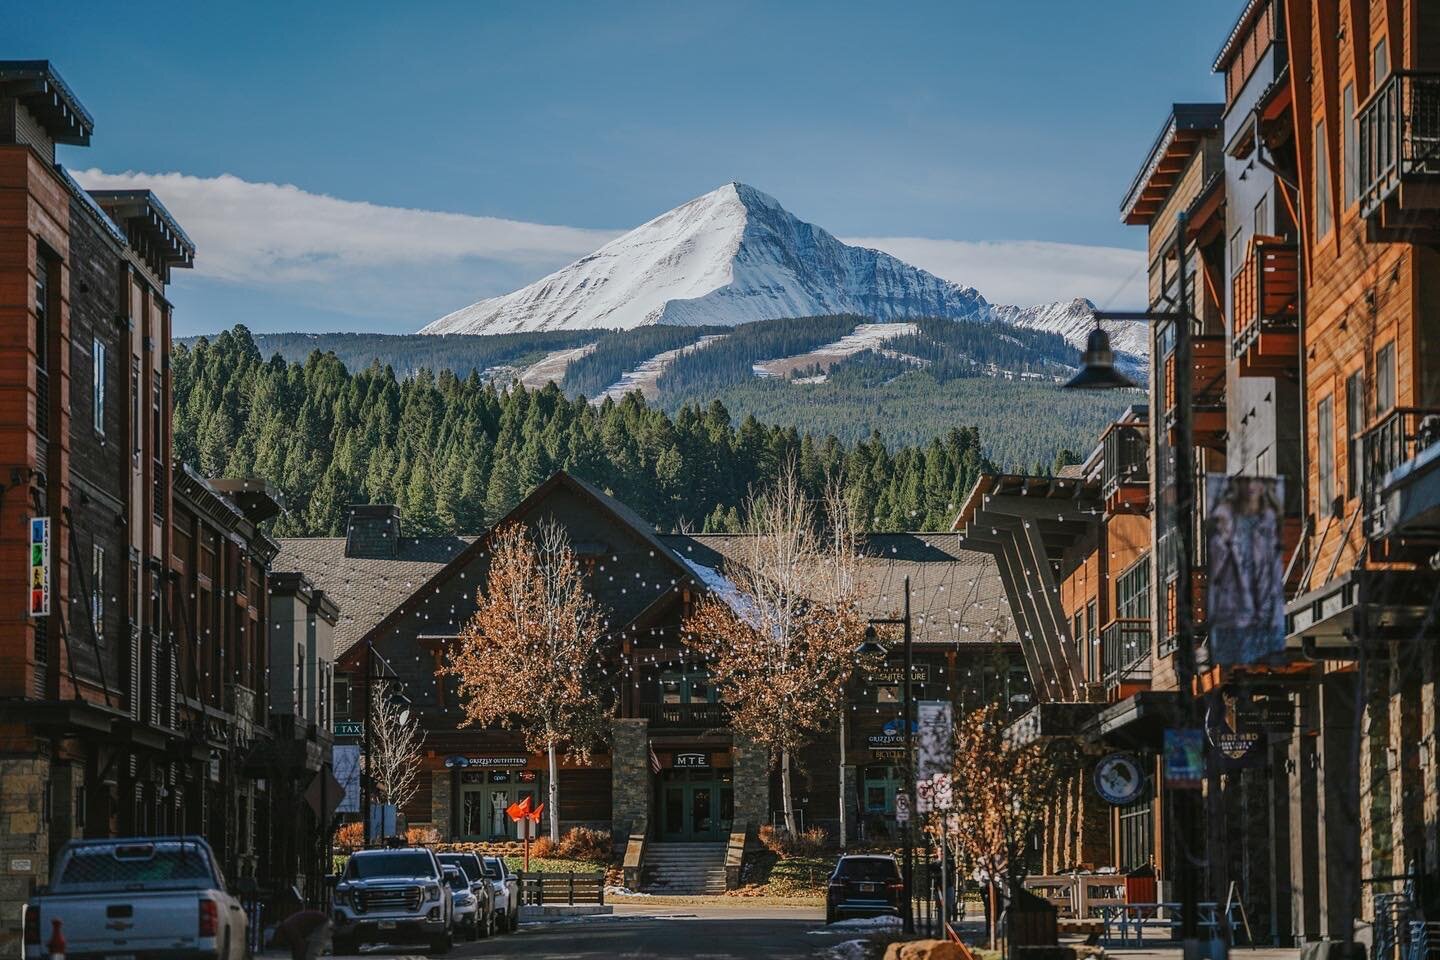 The Town Center Owners Association (an affiliate of Lone Mountain Land Company) is excited to announce the addition of six new retail tenants to the heart of Big Sky's Town Center. These businesses are set to open before the end of the year and will 